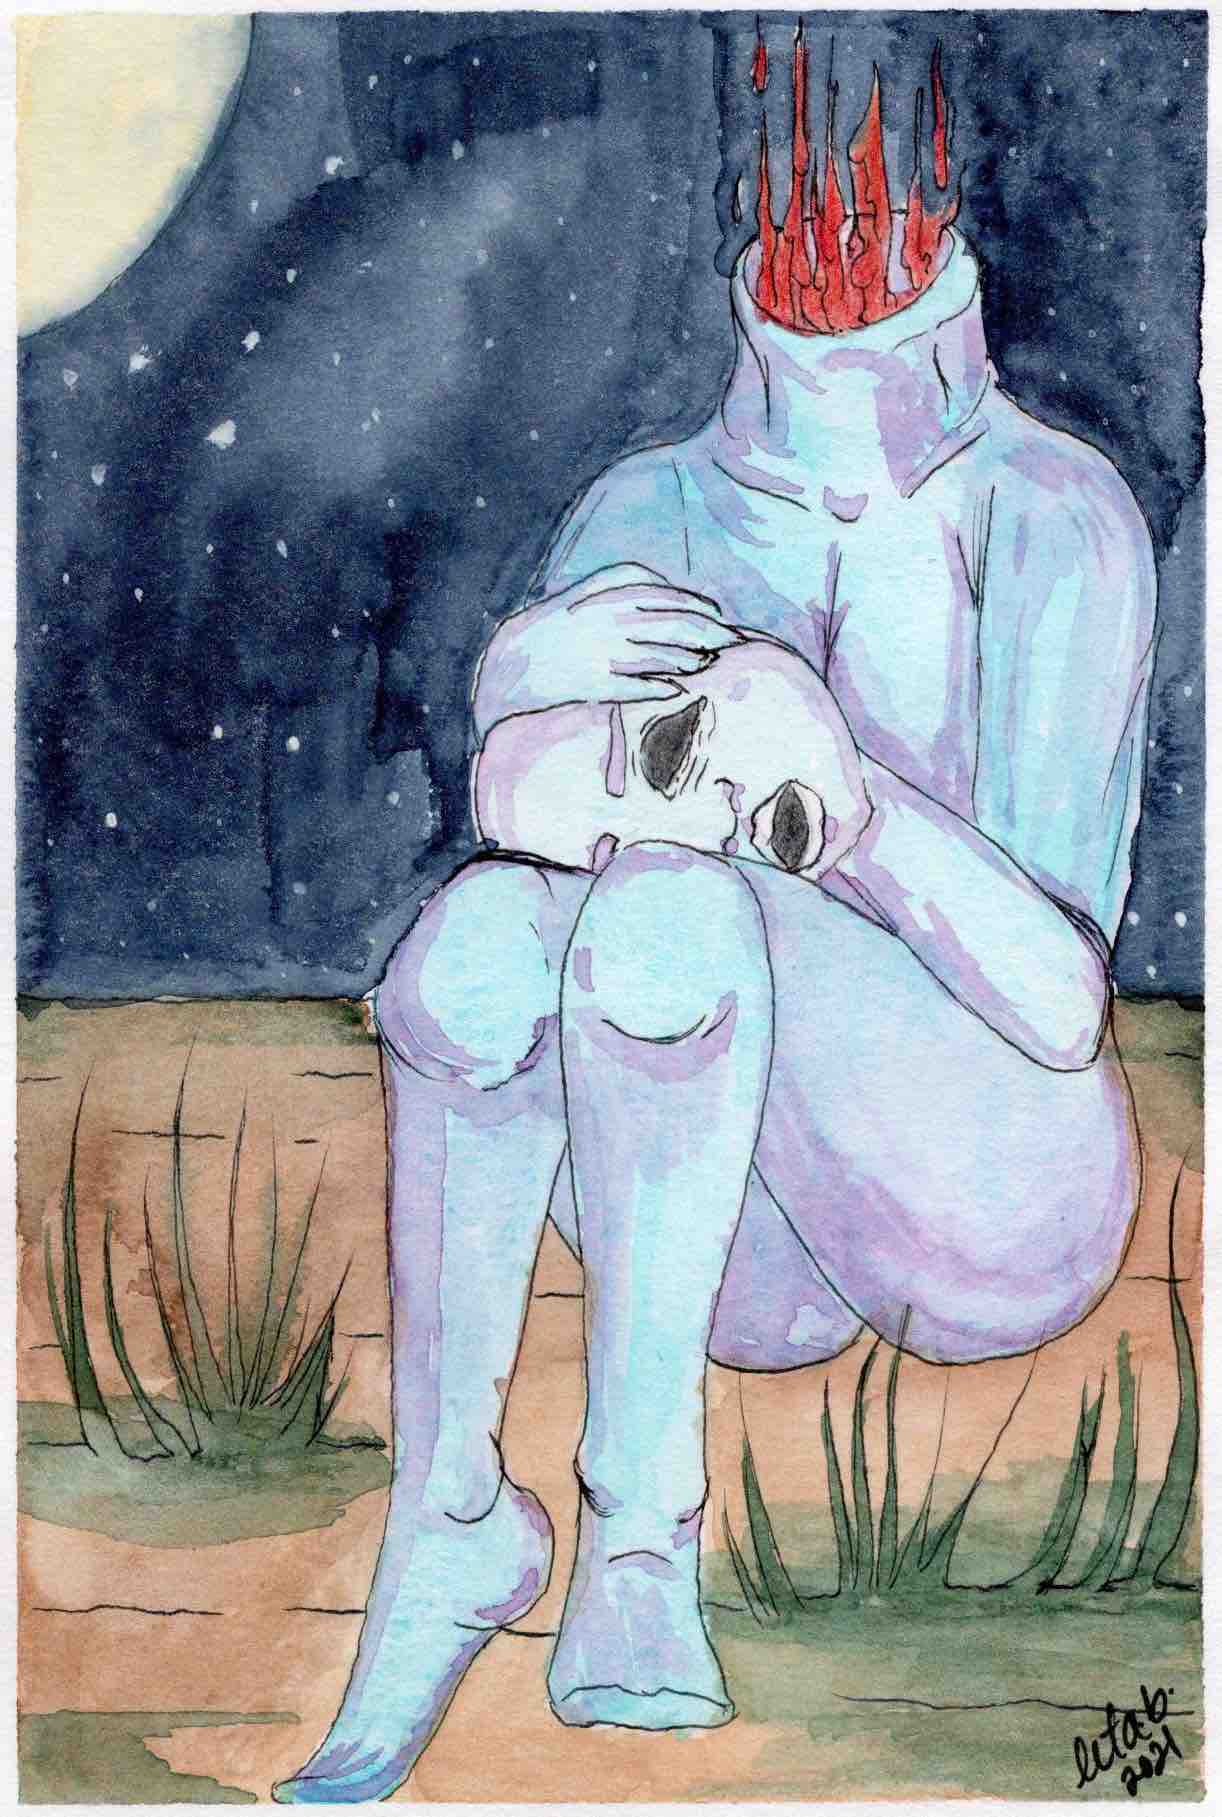 This is a pen drawing colourized with watercolour and guache. In a night scene with a star-studded sky, a decapitated ghostly figure sits on an arid ground. Red flames emerge from the neck stump. The head is clasped tightly on its lap. The eyes and mouth are open but reveal only black hollows and a sad expression.